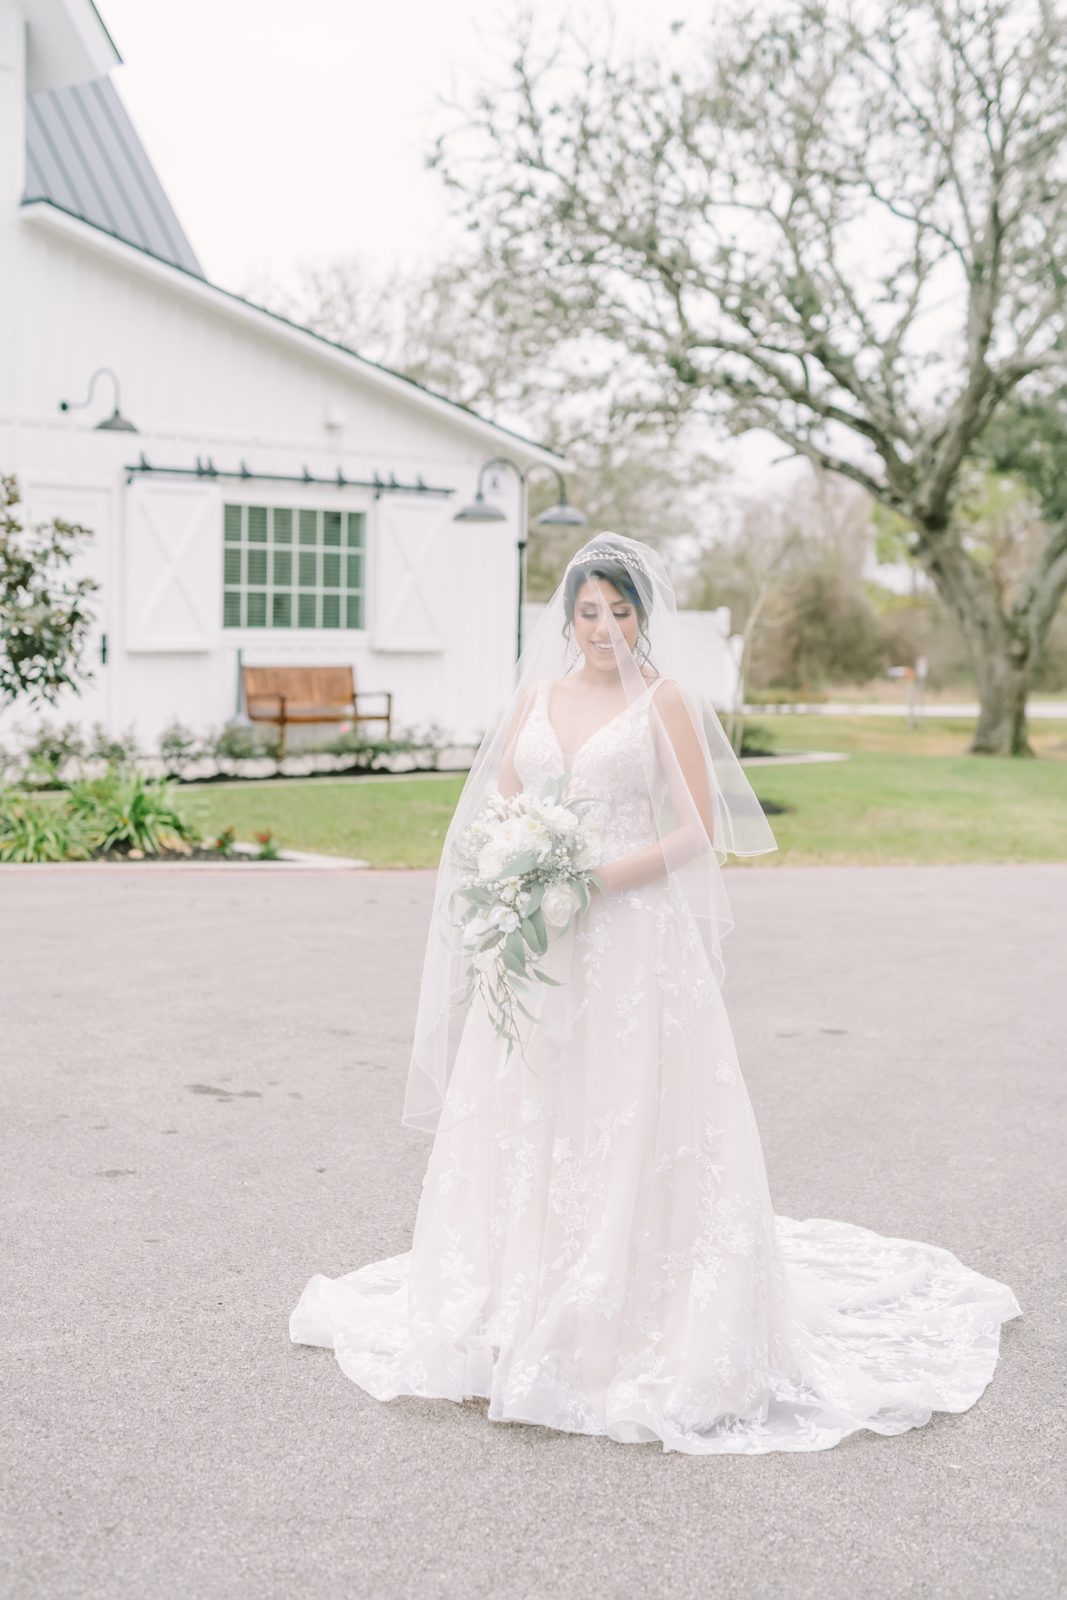 Bride with a veil over her face smiling at The Springs Farmhouse by Chrsitna Elliott Photography. veil lace gown bridal #ChristinaElliottPhotography #ChristinaElliottBridals #Houstonweddings #Farmhousewedding #TheSpringsVenue #BridalsHouston